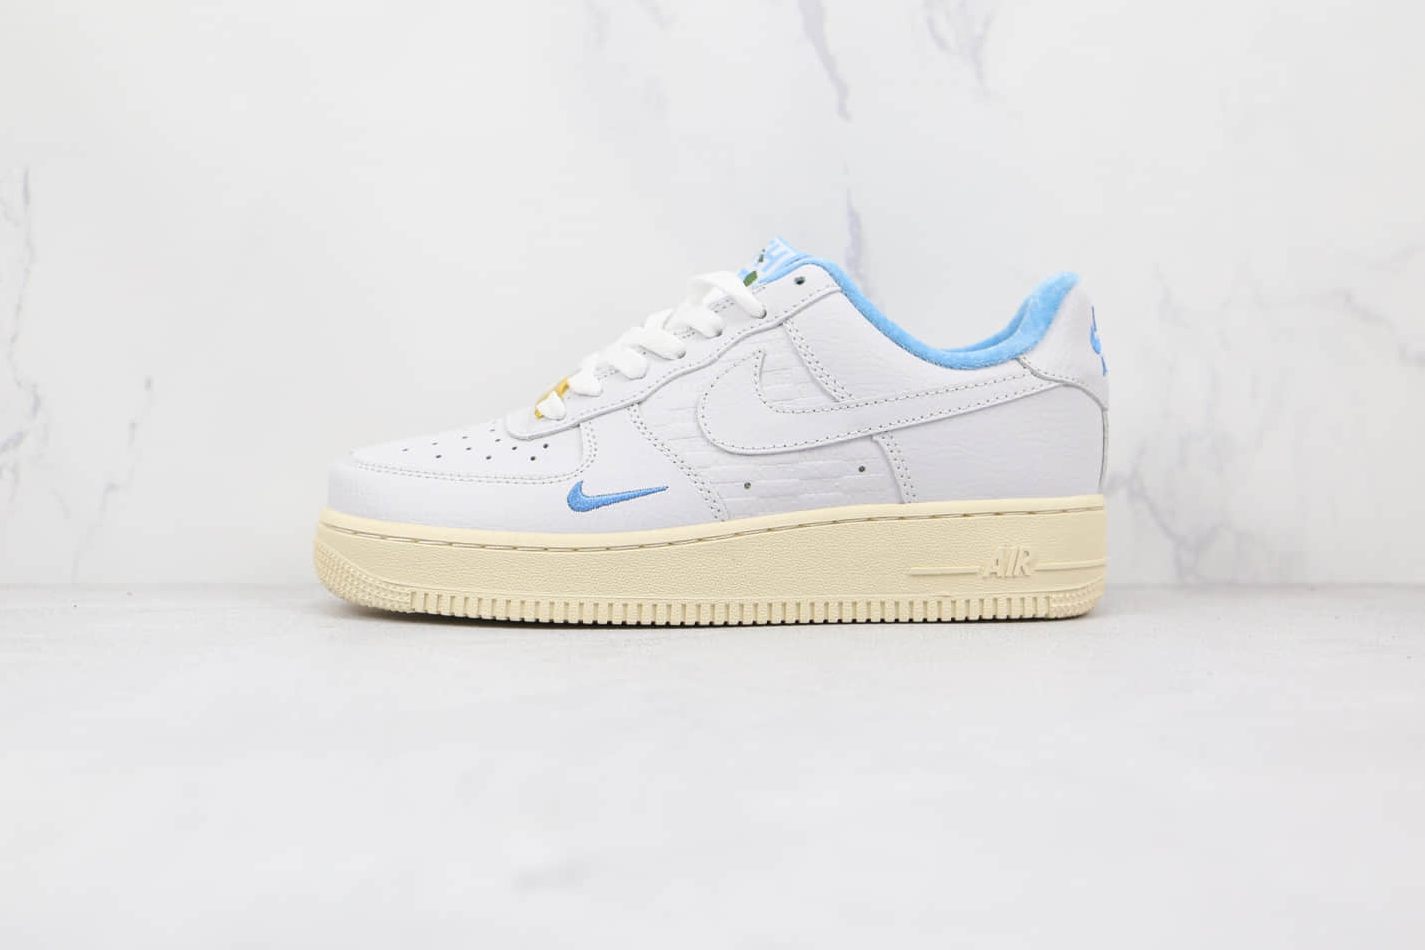 KITH x Nike Air Force 1 Low 'Hawaii' DC9555-100 - Limited Edition Collaboration